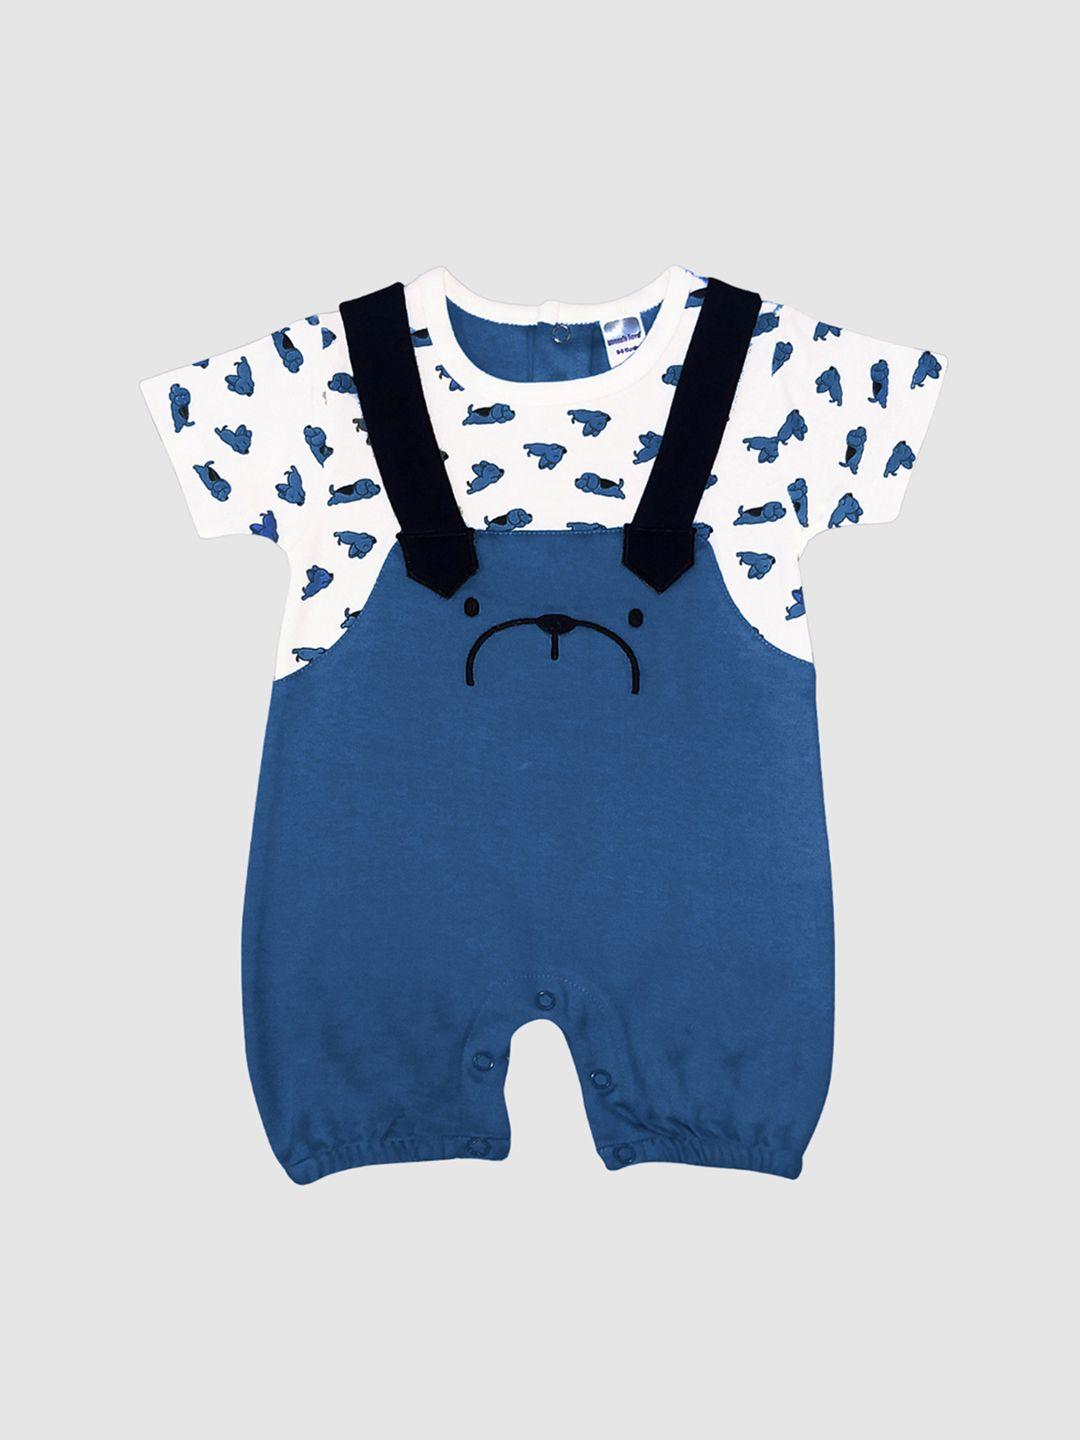 moms love infant girls printed cotton rompers